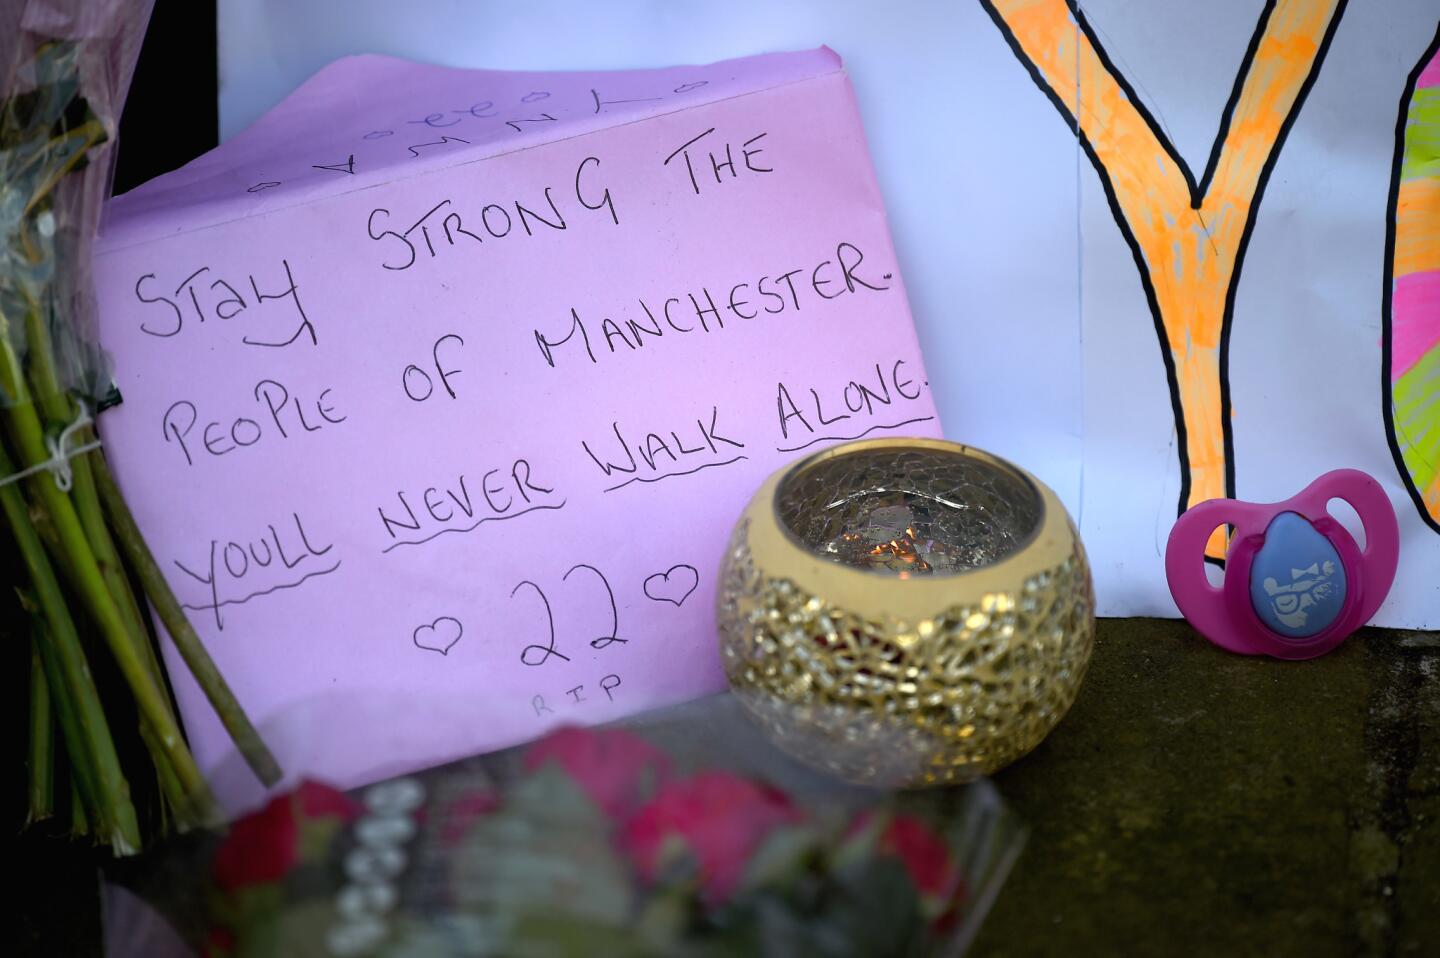 Tributes are being left in St. Ann's Square in Manchester, England.